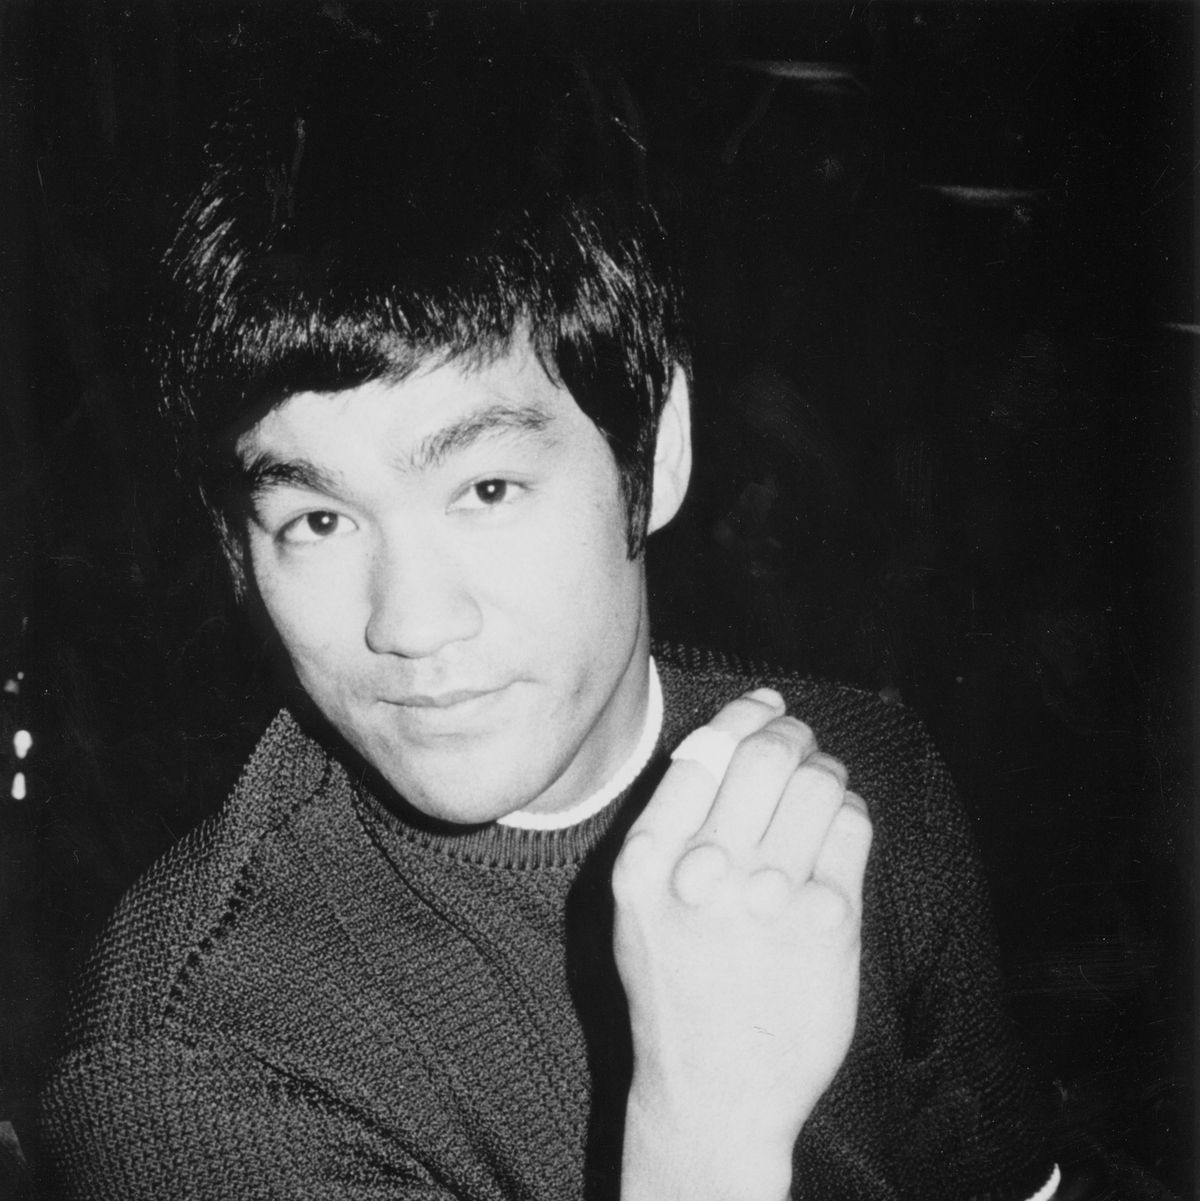 Bruce Lee's Daughter Shannon Lee and Bao Nguyen Discuss 'Be Water' Doc